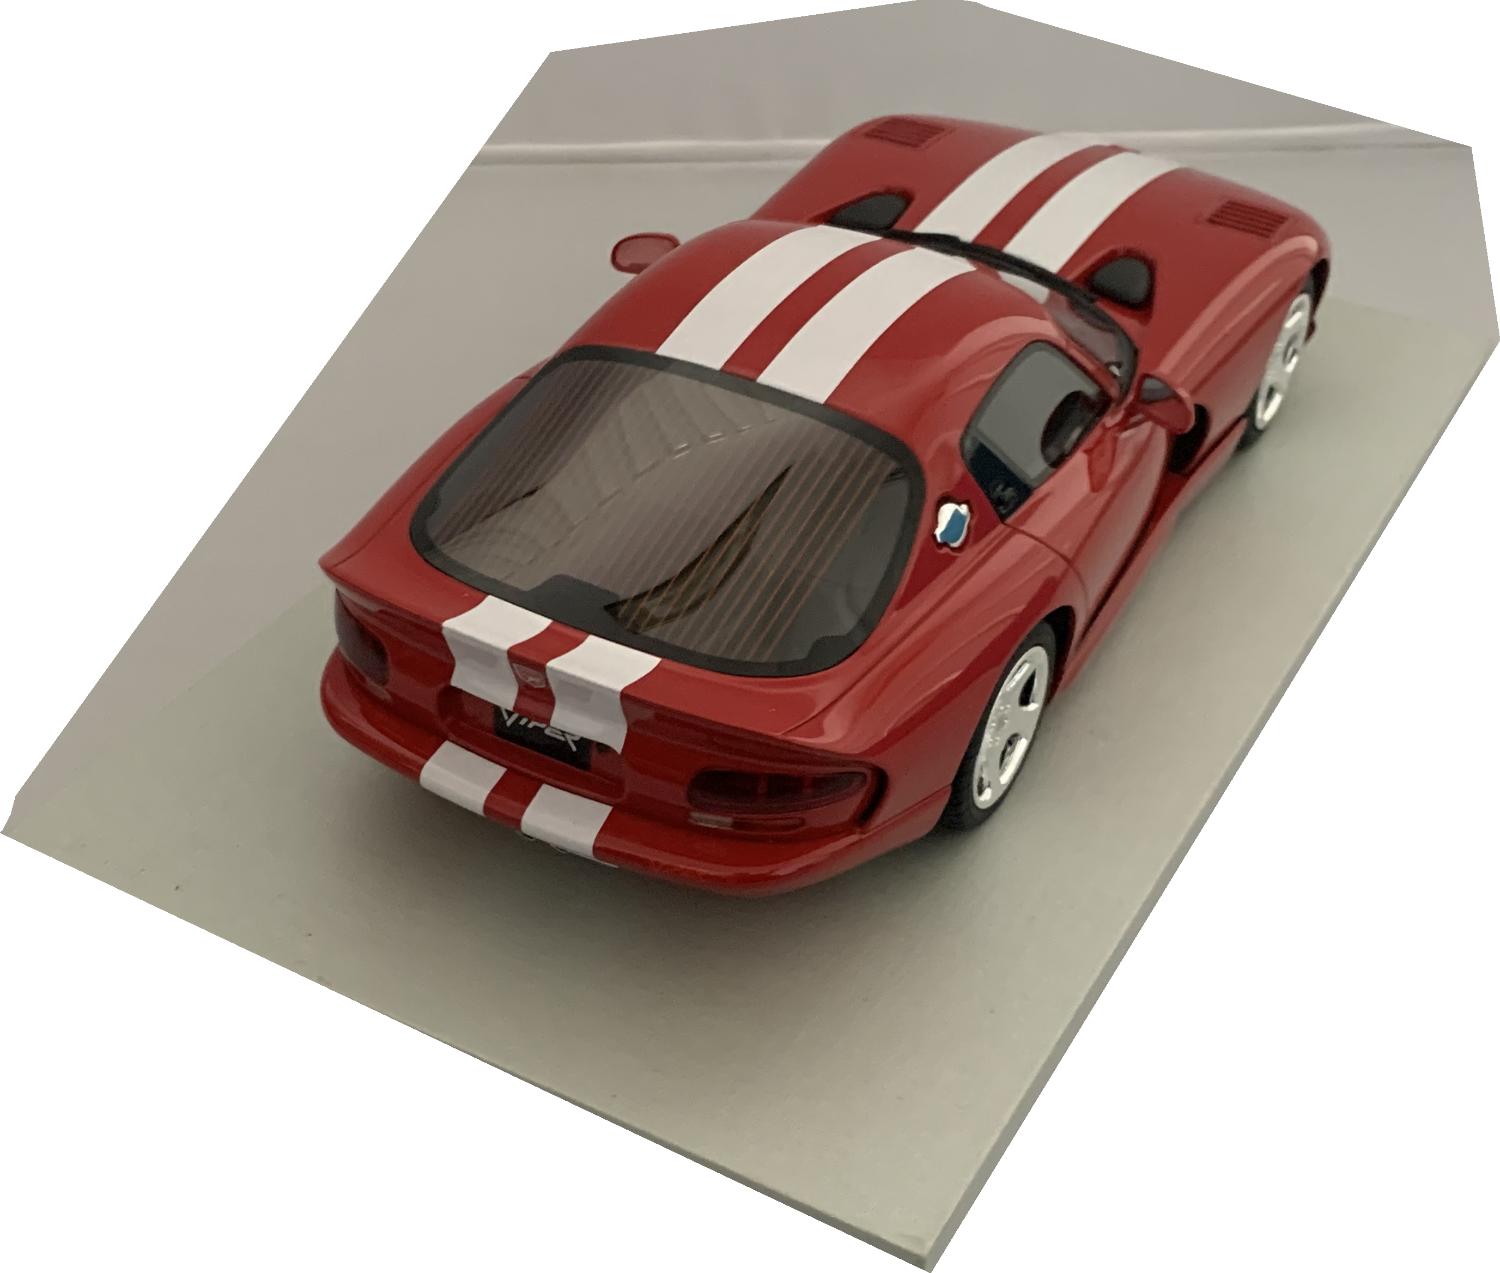 An excellent scale model of the Dodge Viper GTS, The car is approx. 24.5 cm long and the presentation box is 3 cm long